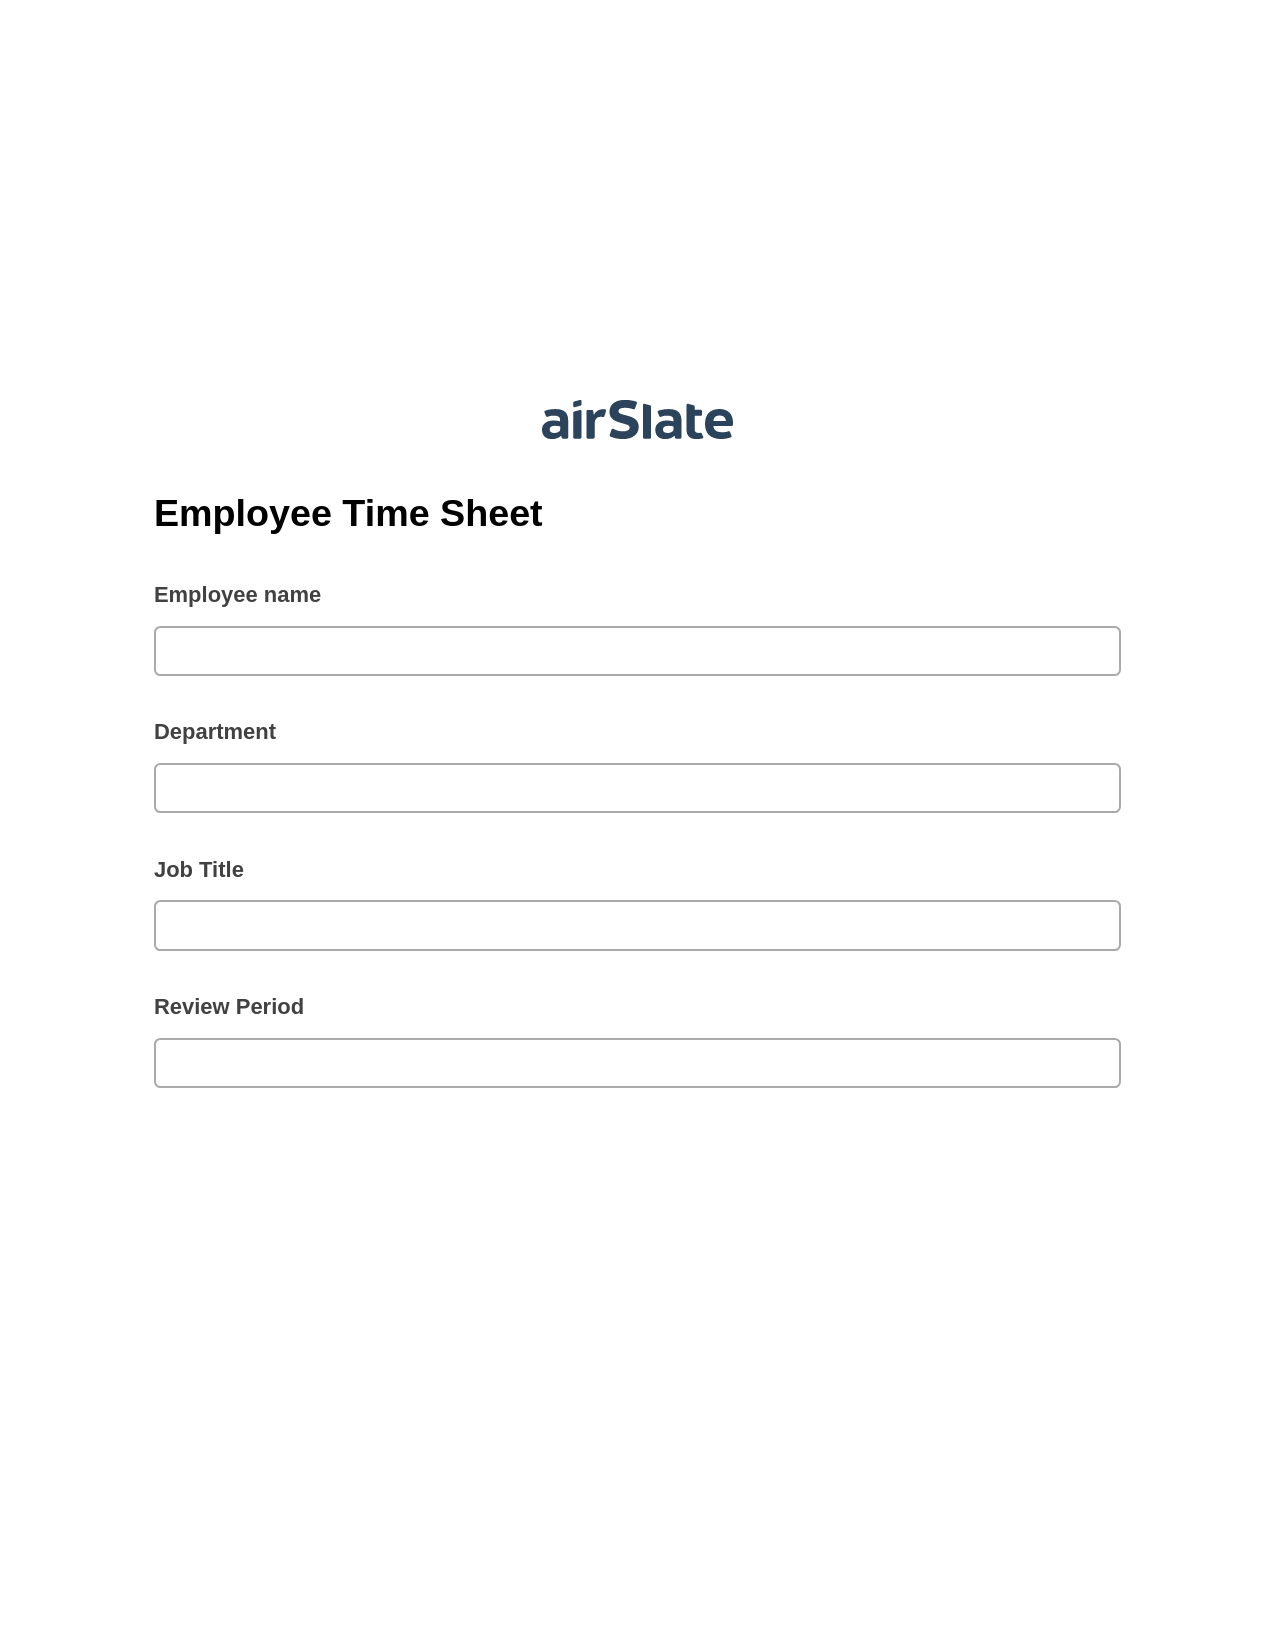 Employee Time Sheet Pre-fill from MS Dynamics 365 Records, Create slate addon, Archive to Google Drive Bot